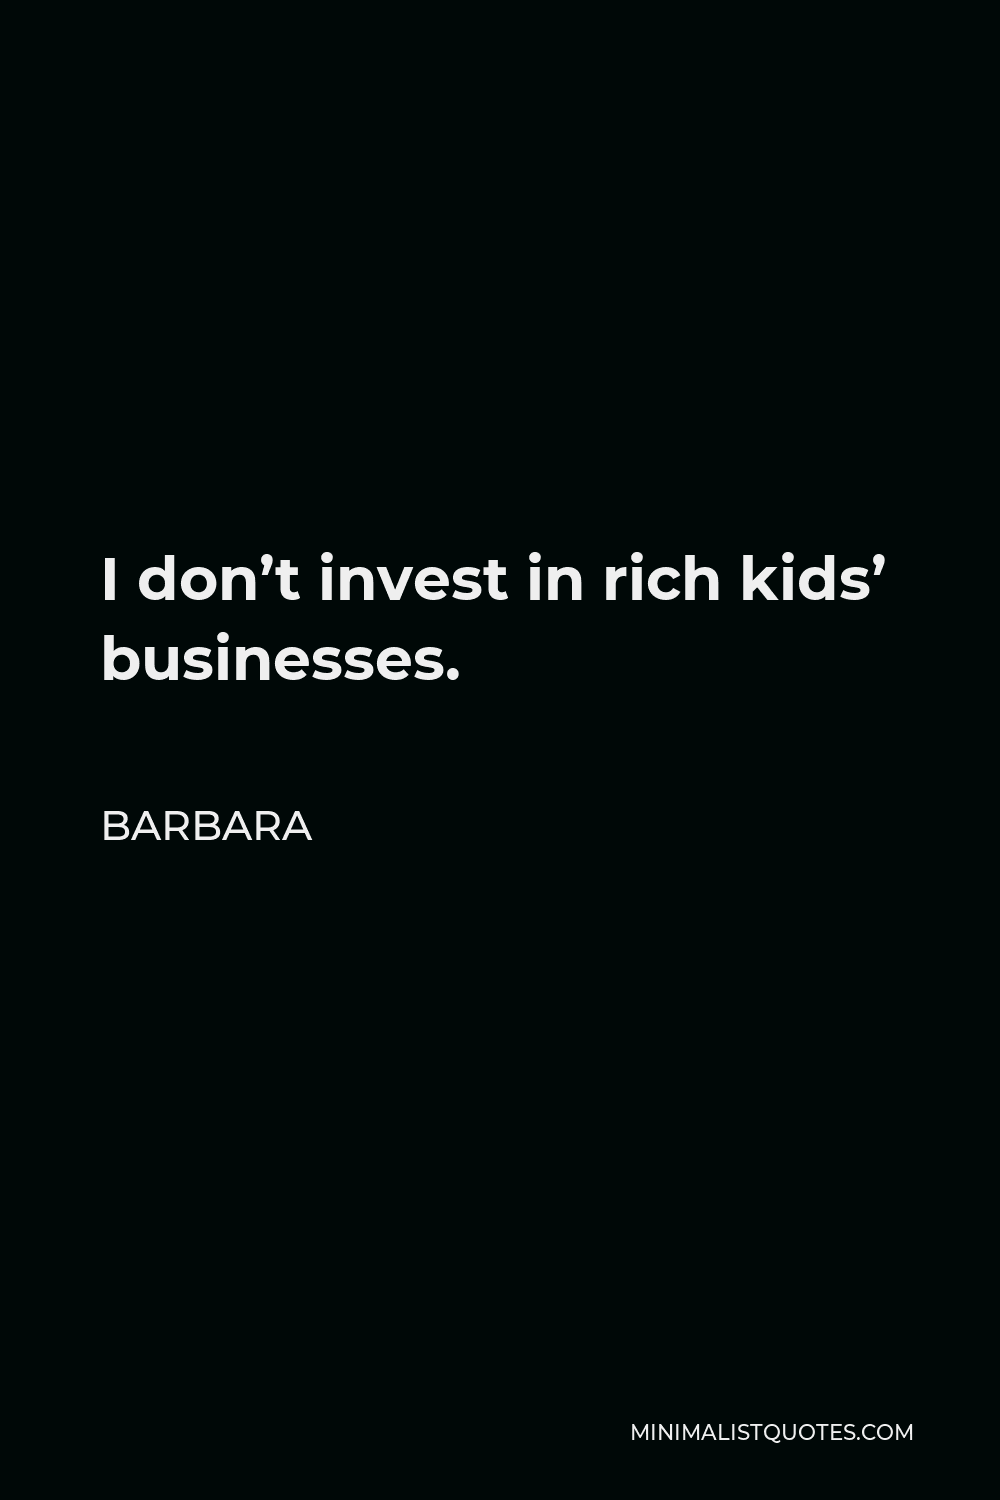 Barbara Quote - I don’t invest in rich kids’ businesses.